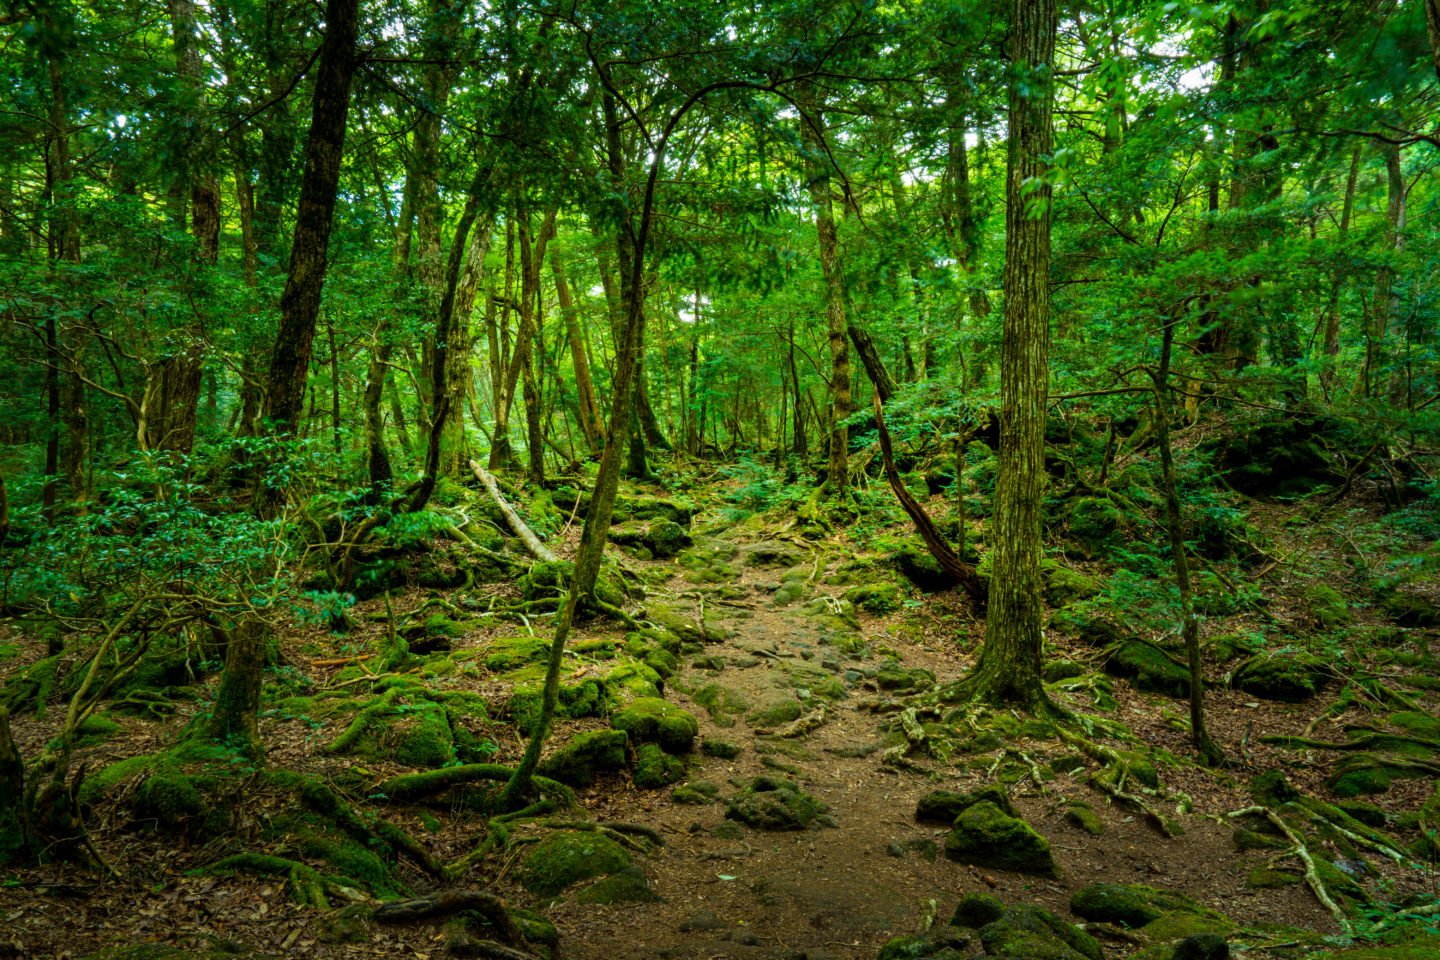 The Dark Story Of Japan’s Suicide Forest Will Get You Thinking Twice